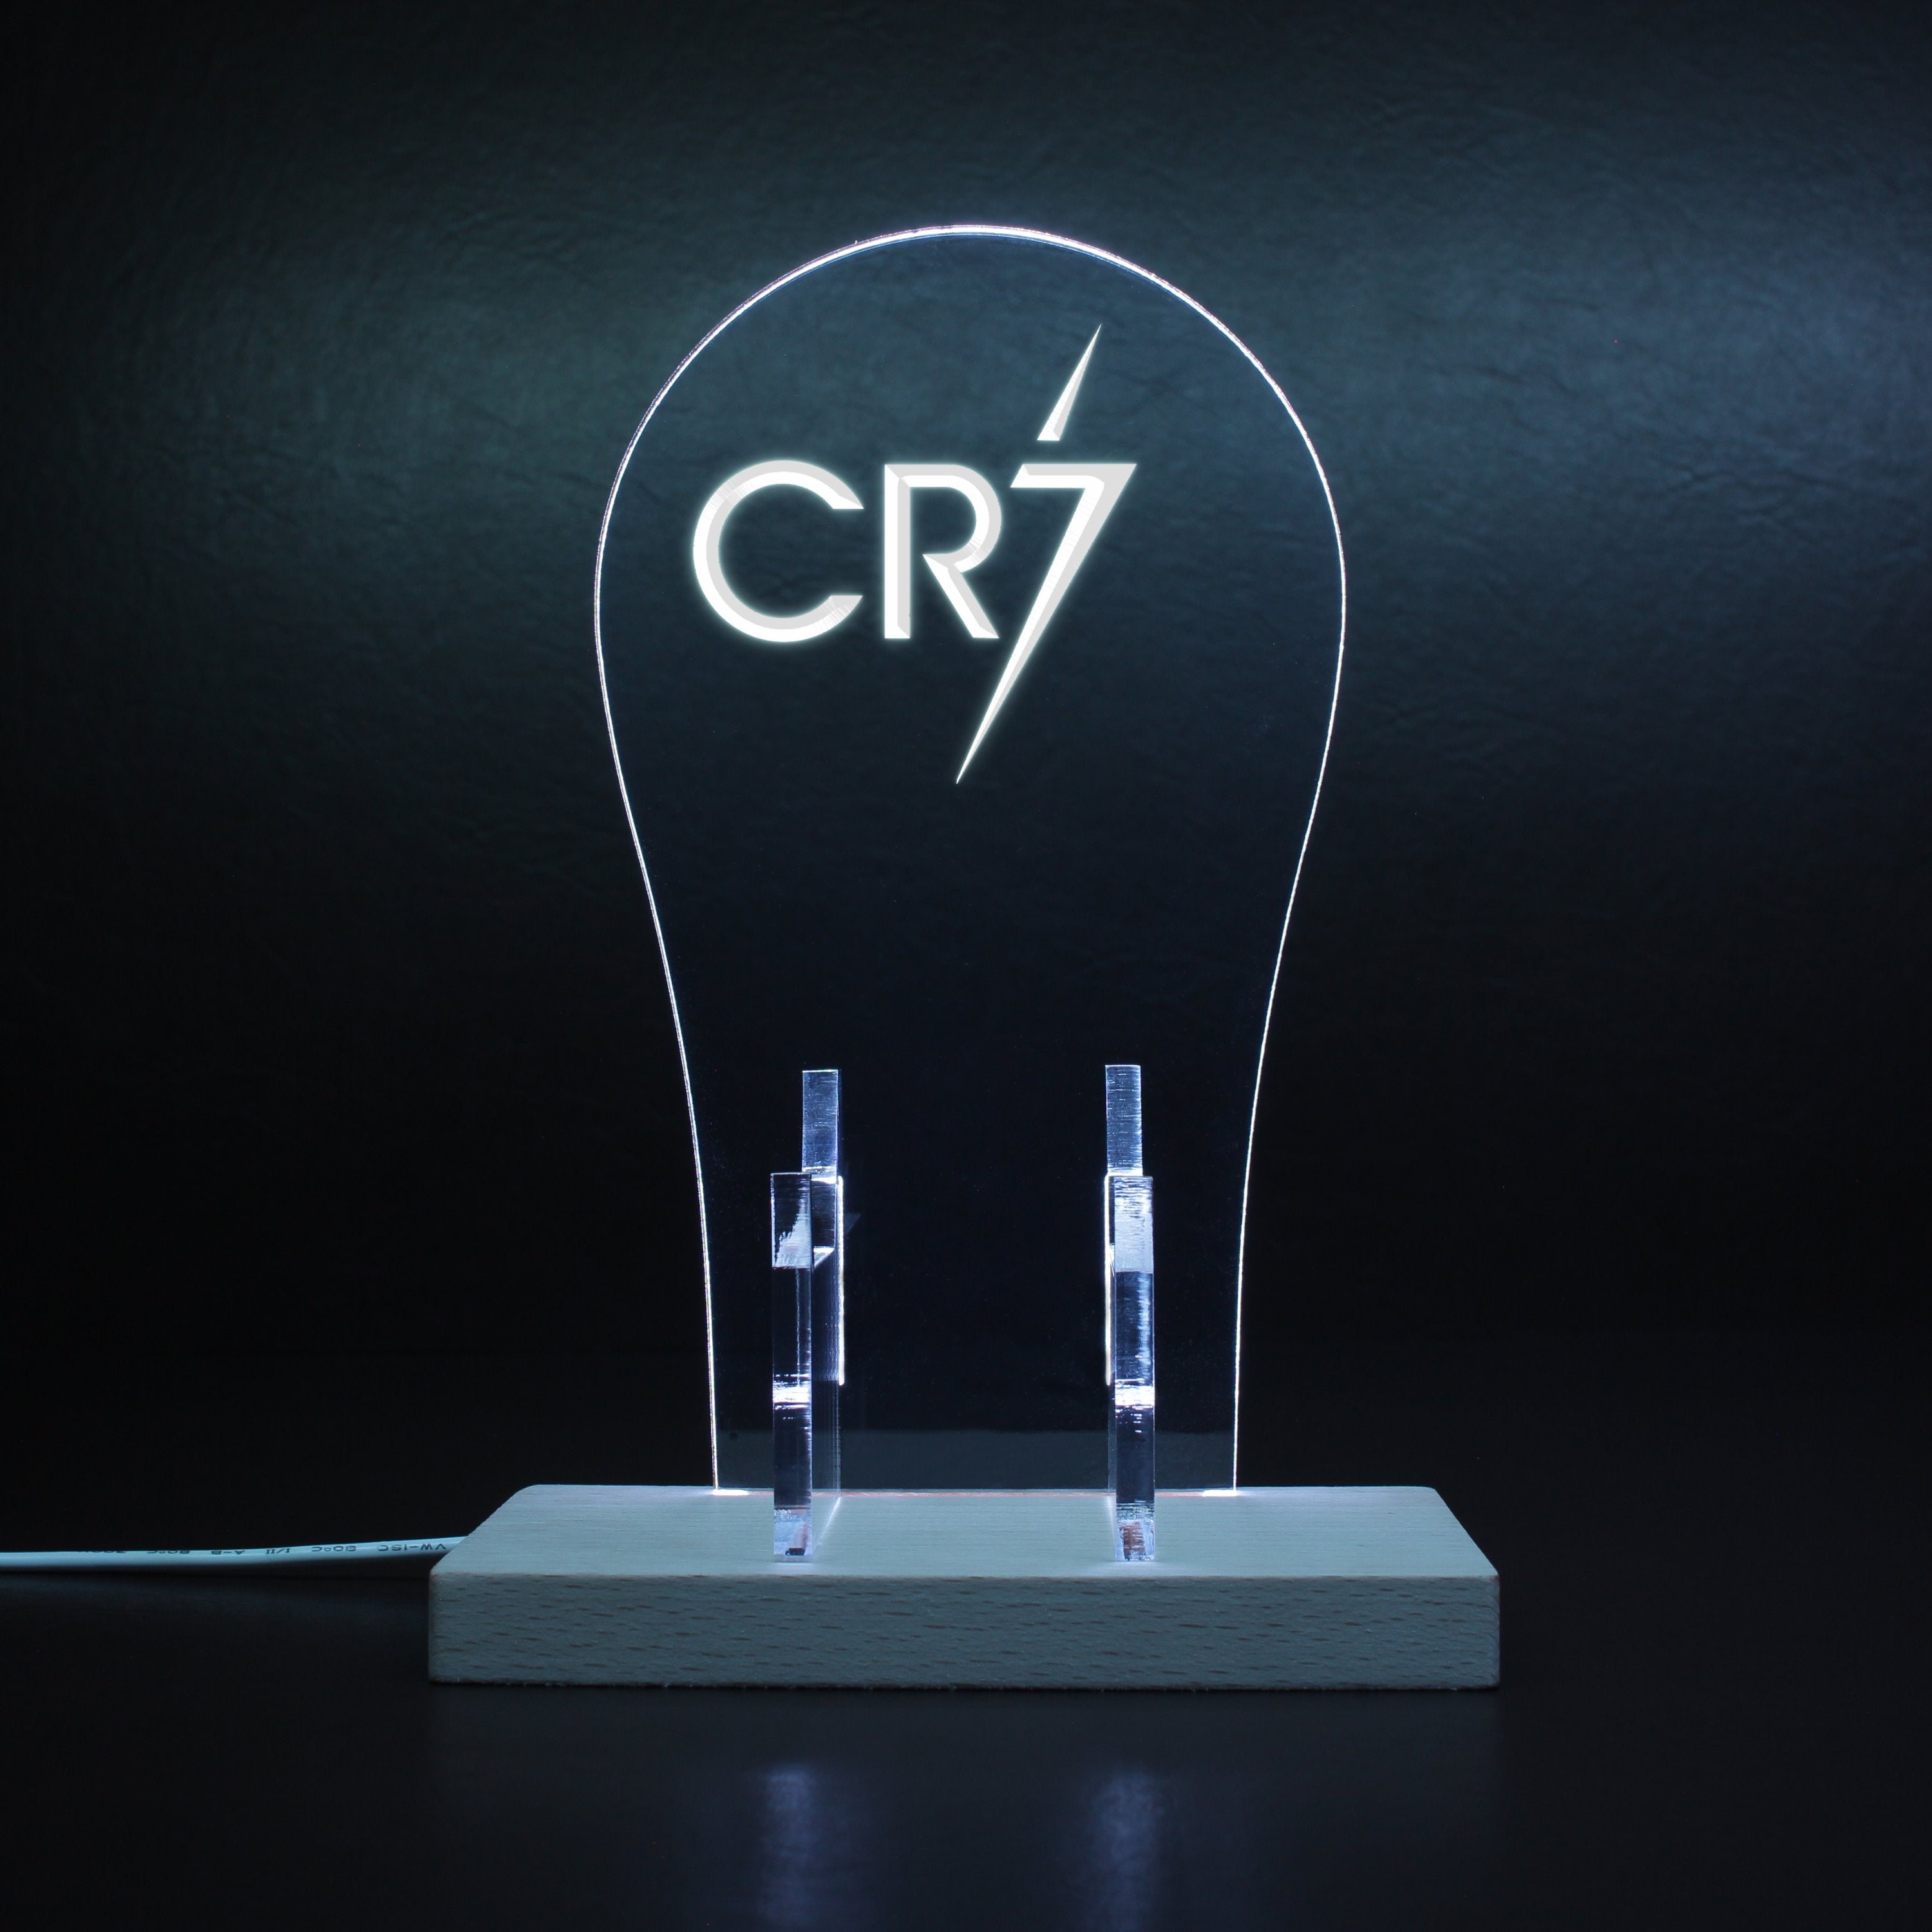 Cristiano-Ronaldo-7 RGB LED Gaming Headset Controller Stand